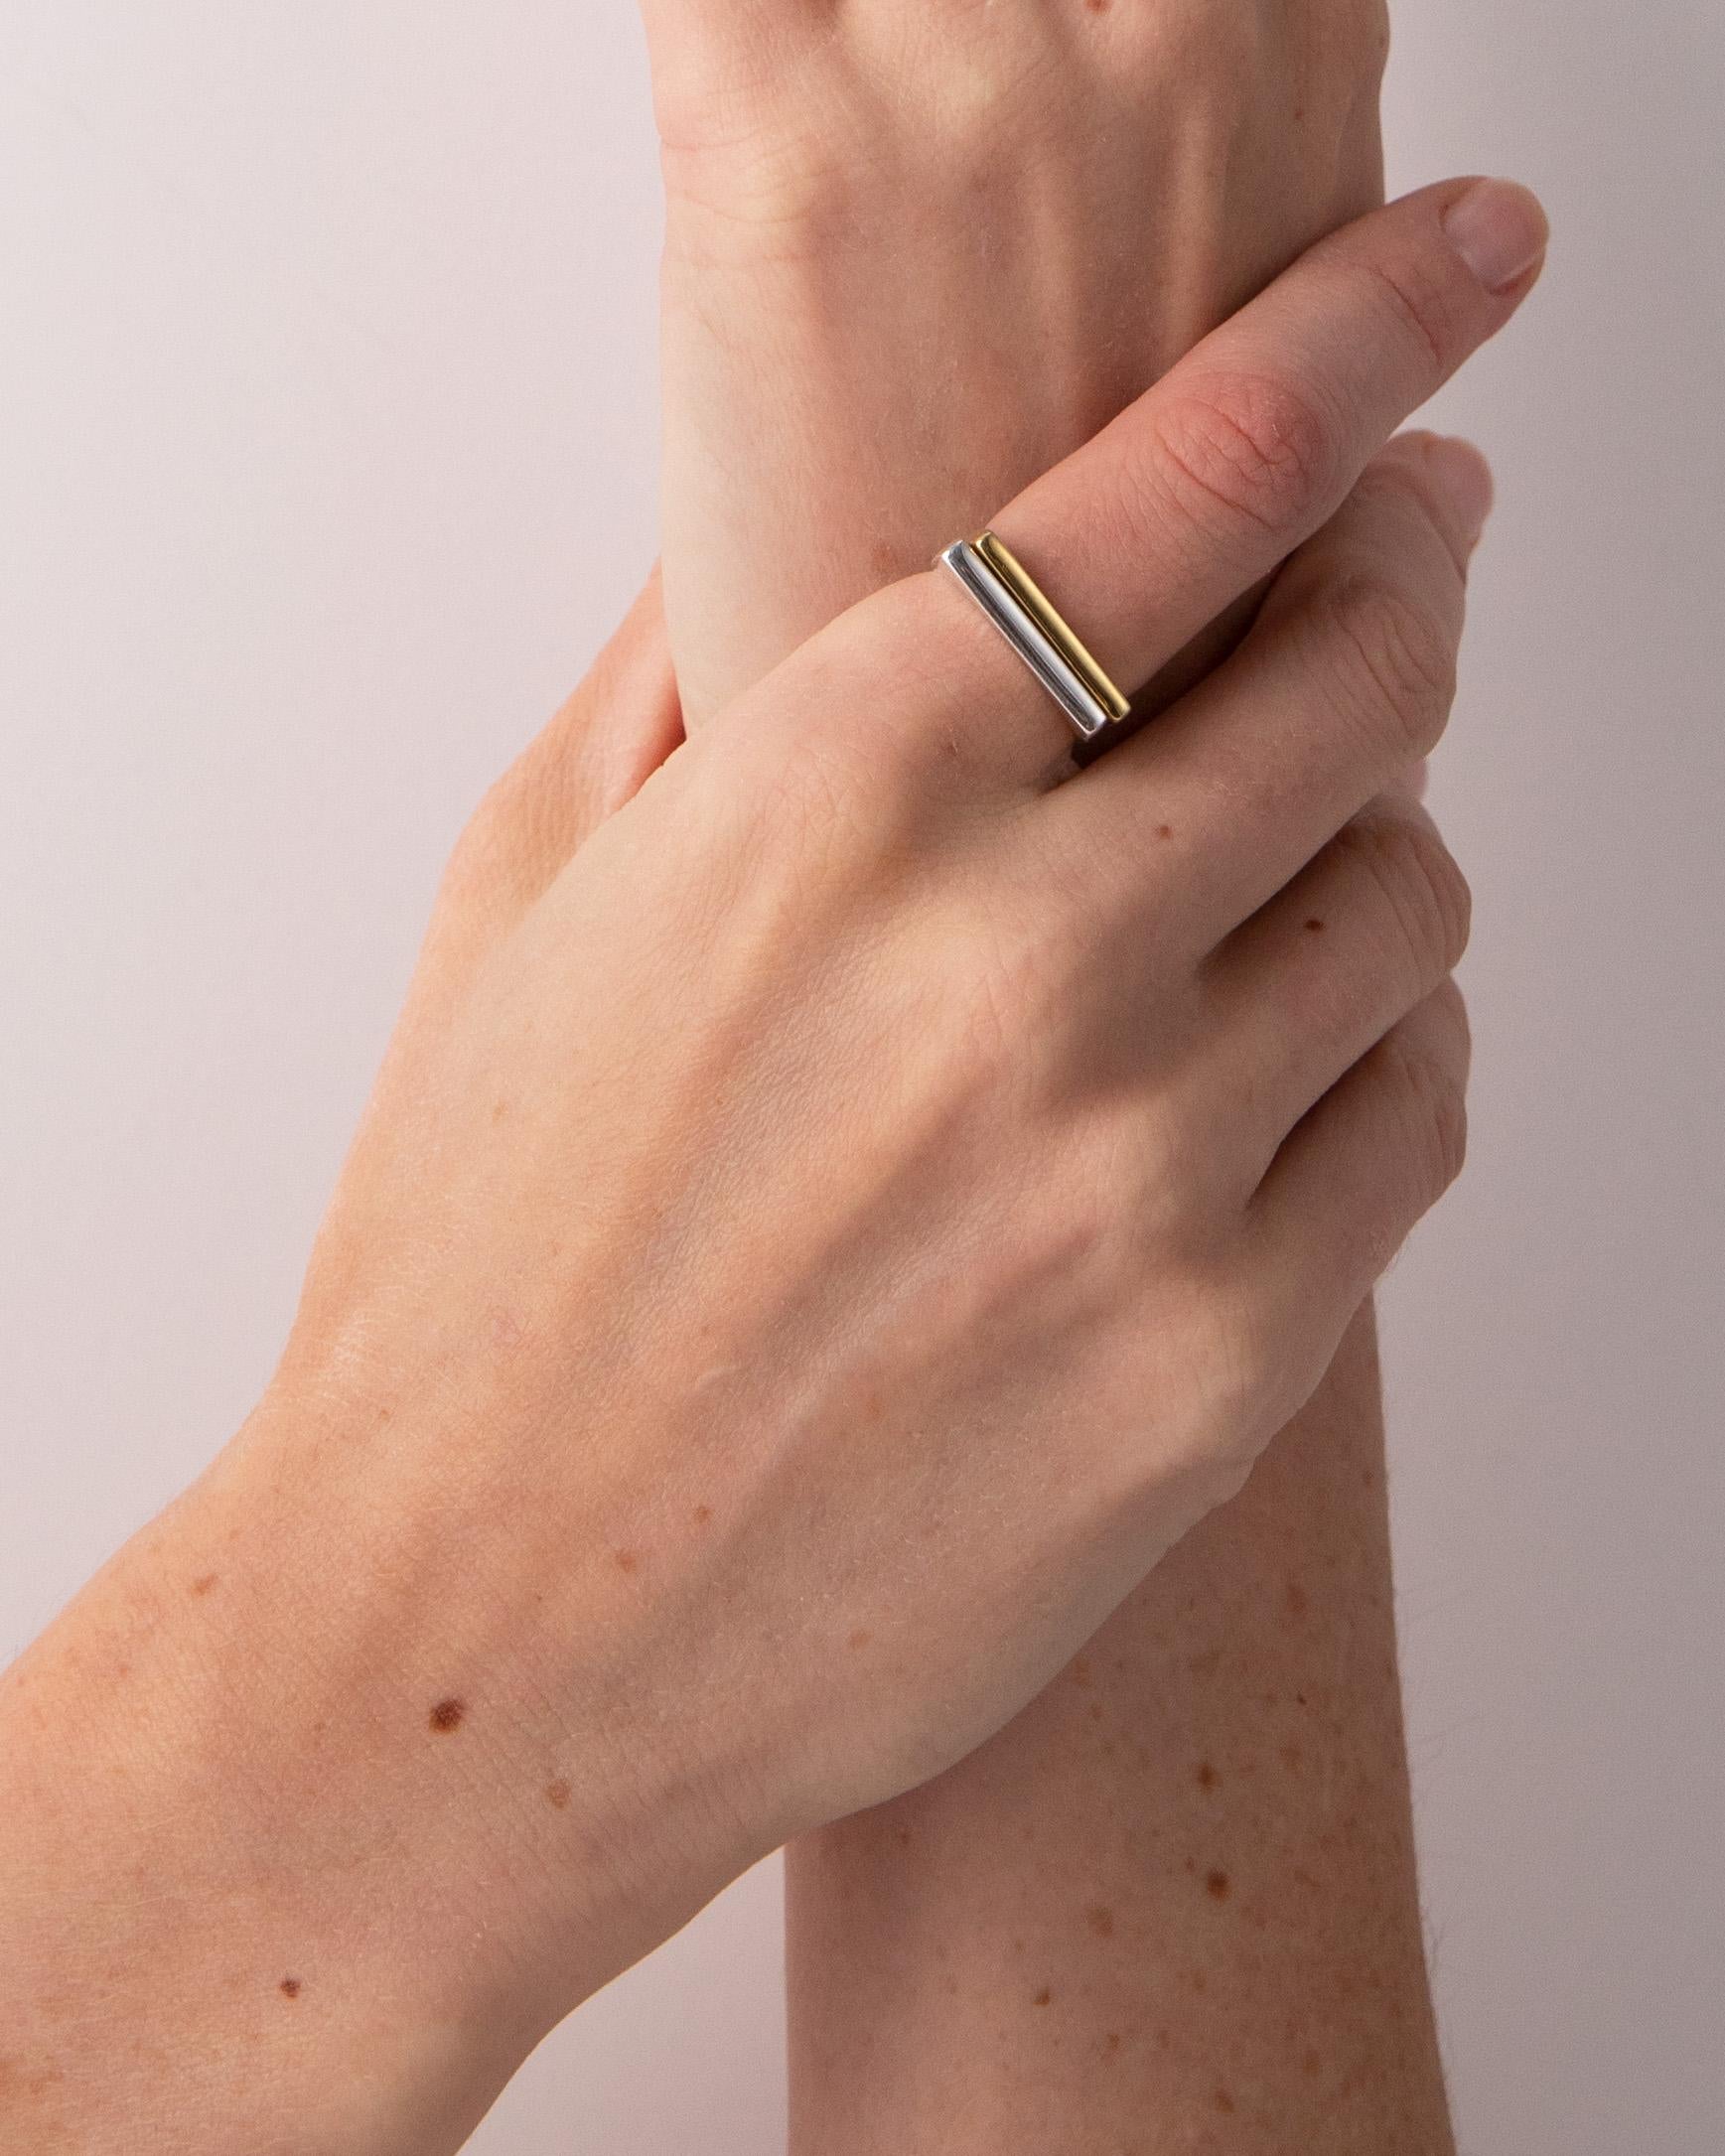 For Sale:  'Small Block' Sterling Silver Stackable Ring by Emerging Designer Brenna Colvin 2